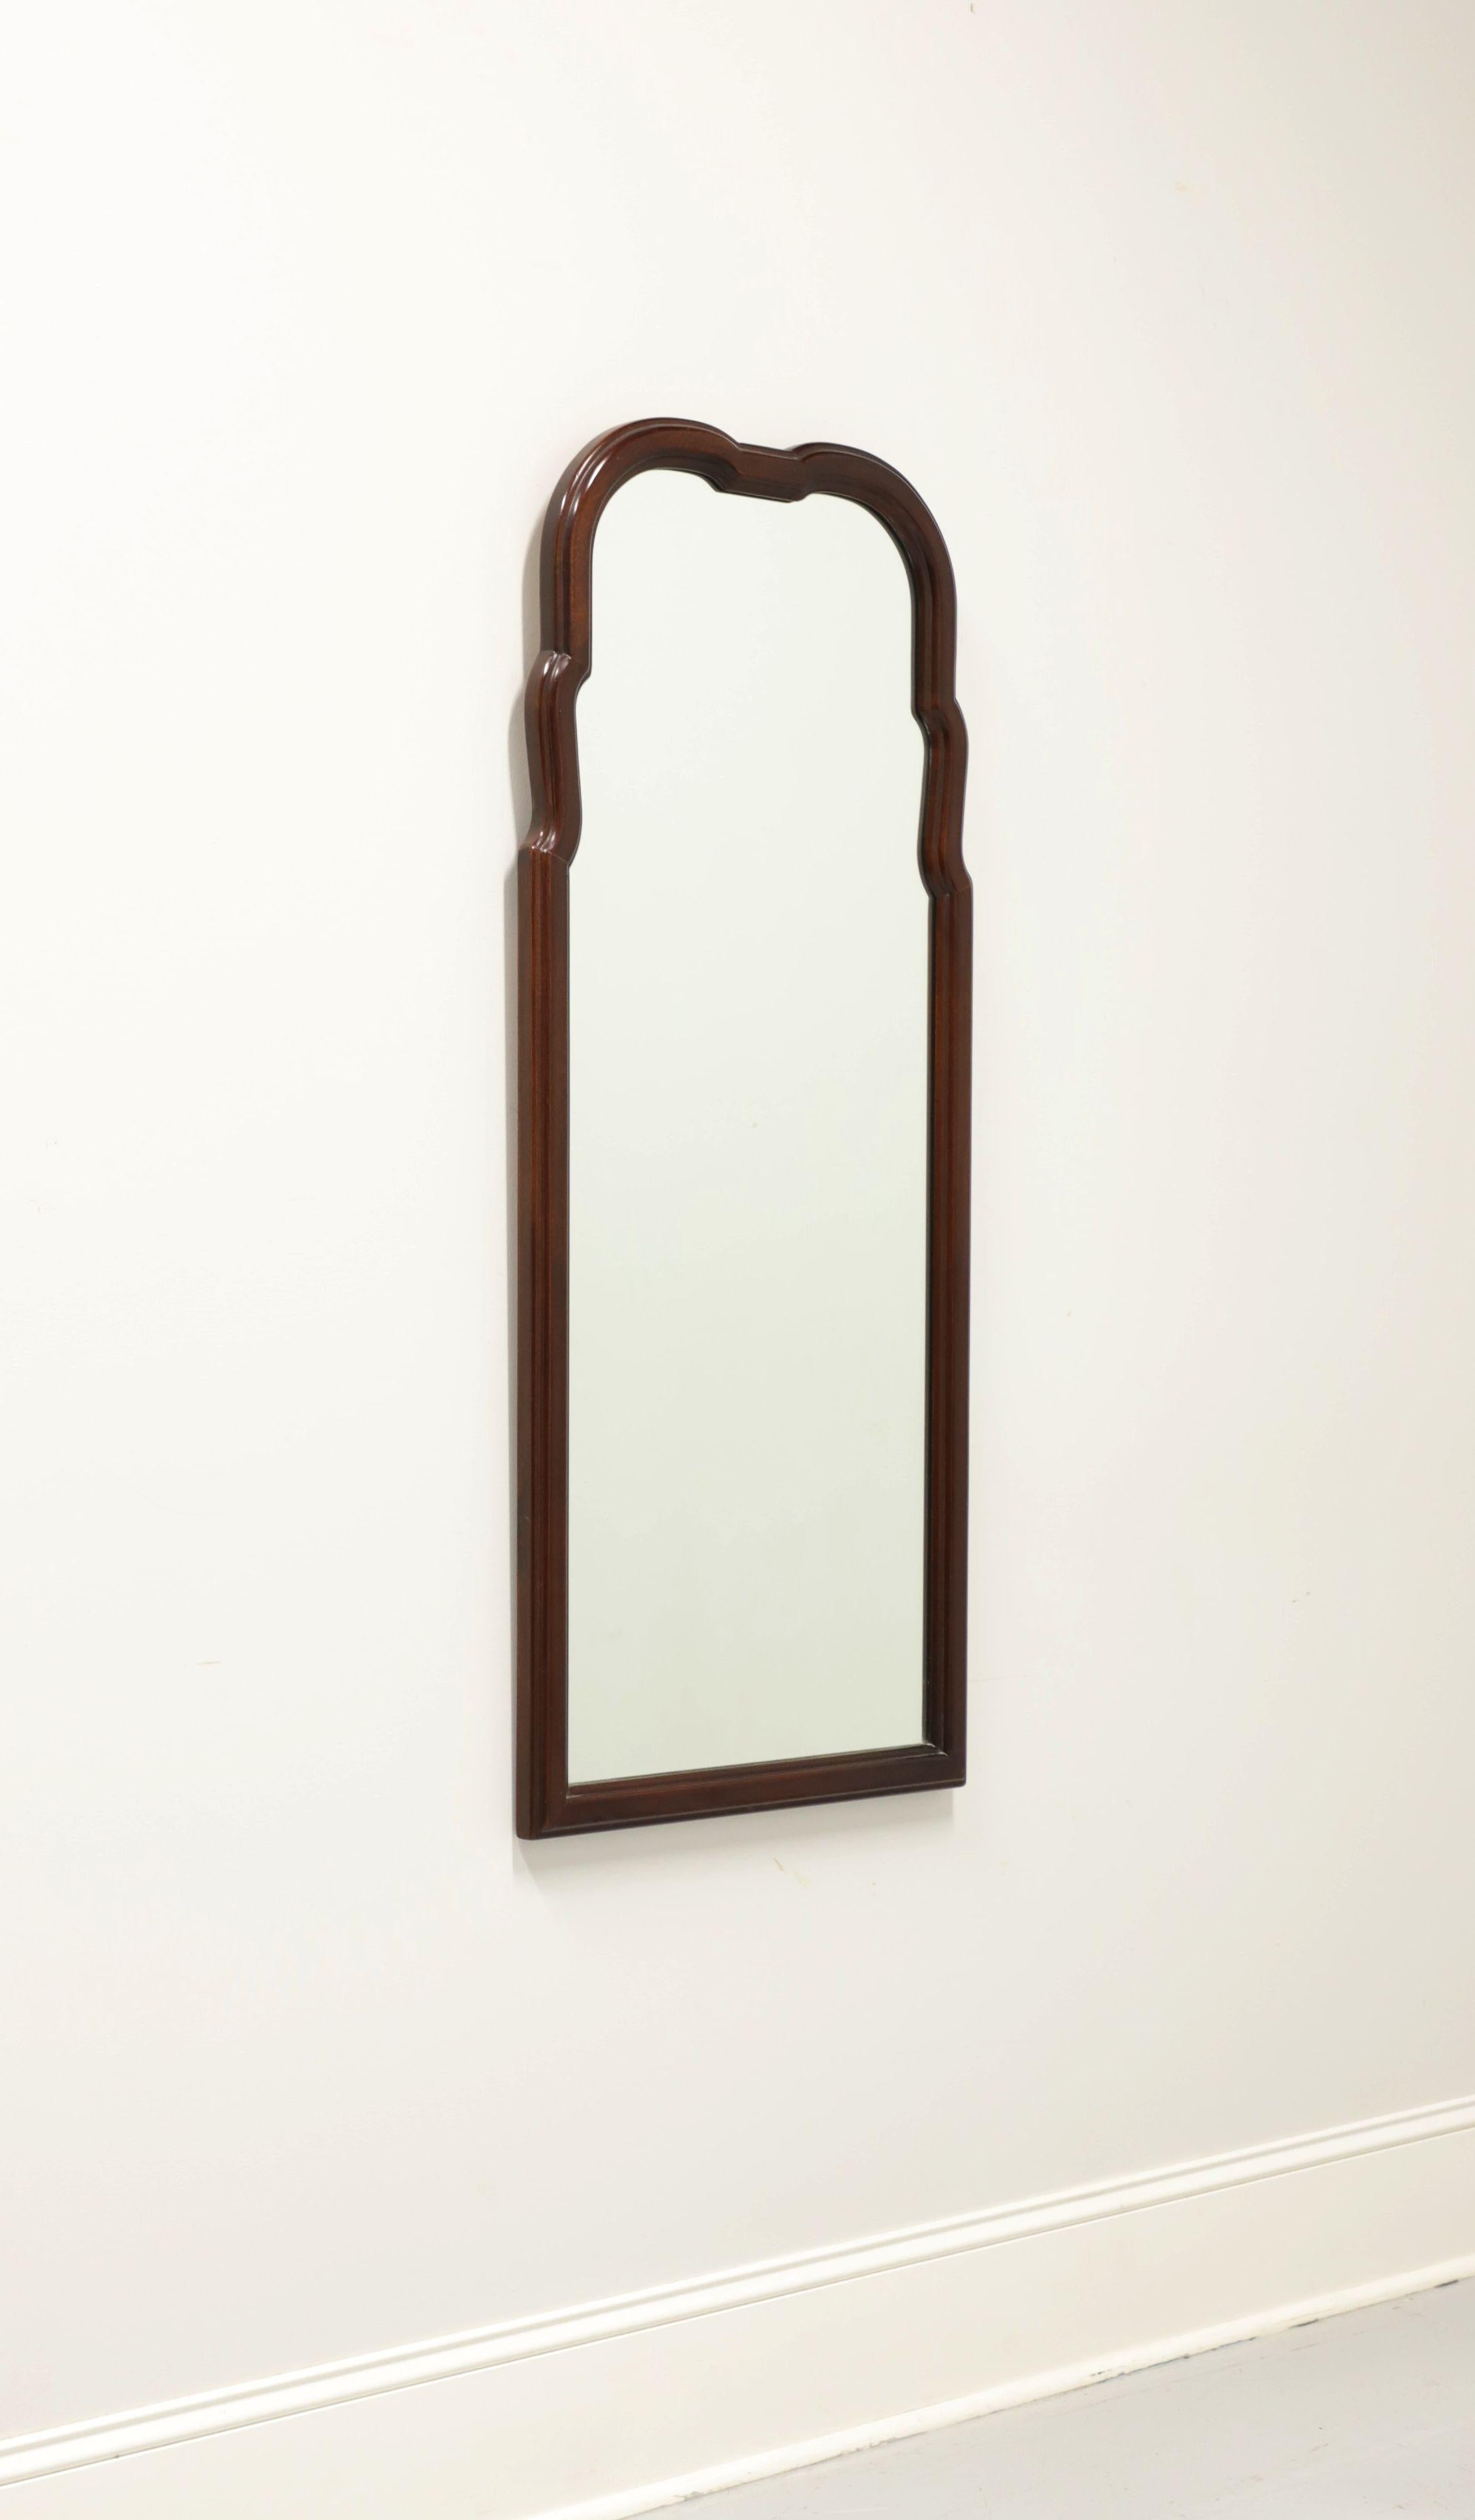 A French style wall mirror, unbranded. Mirror glass and solid mahogany frame with decoratively carved top and slender profile. Made in the USA, in the late 20th Century.

Measures: 20.75 W 1.25 D 48.5 H, Weighs Approximately: 24 lbs

Exceptionally